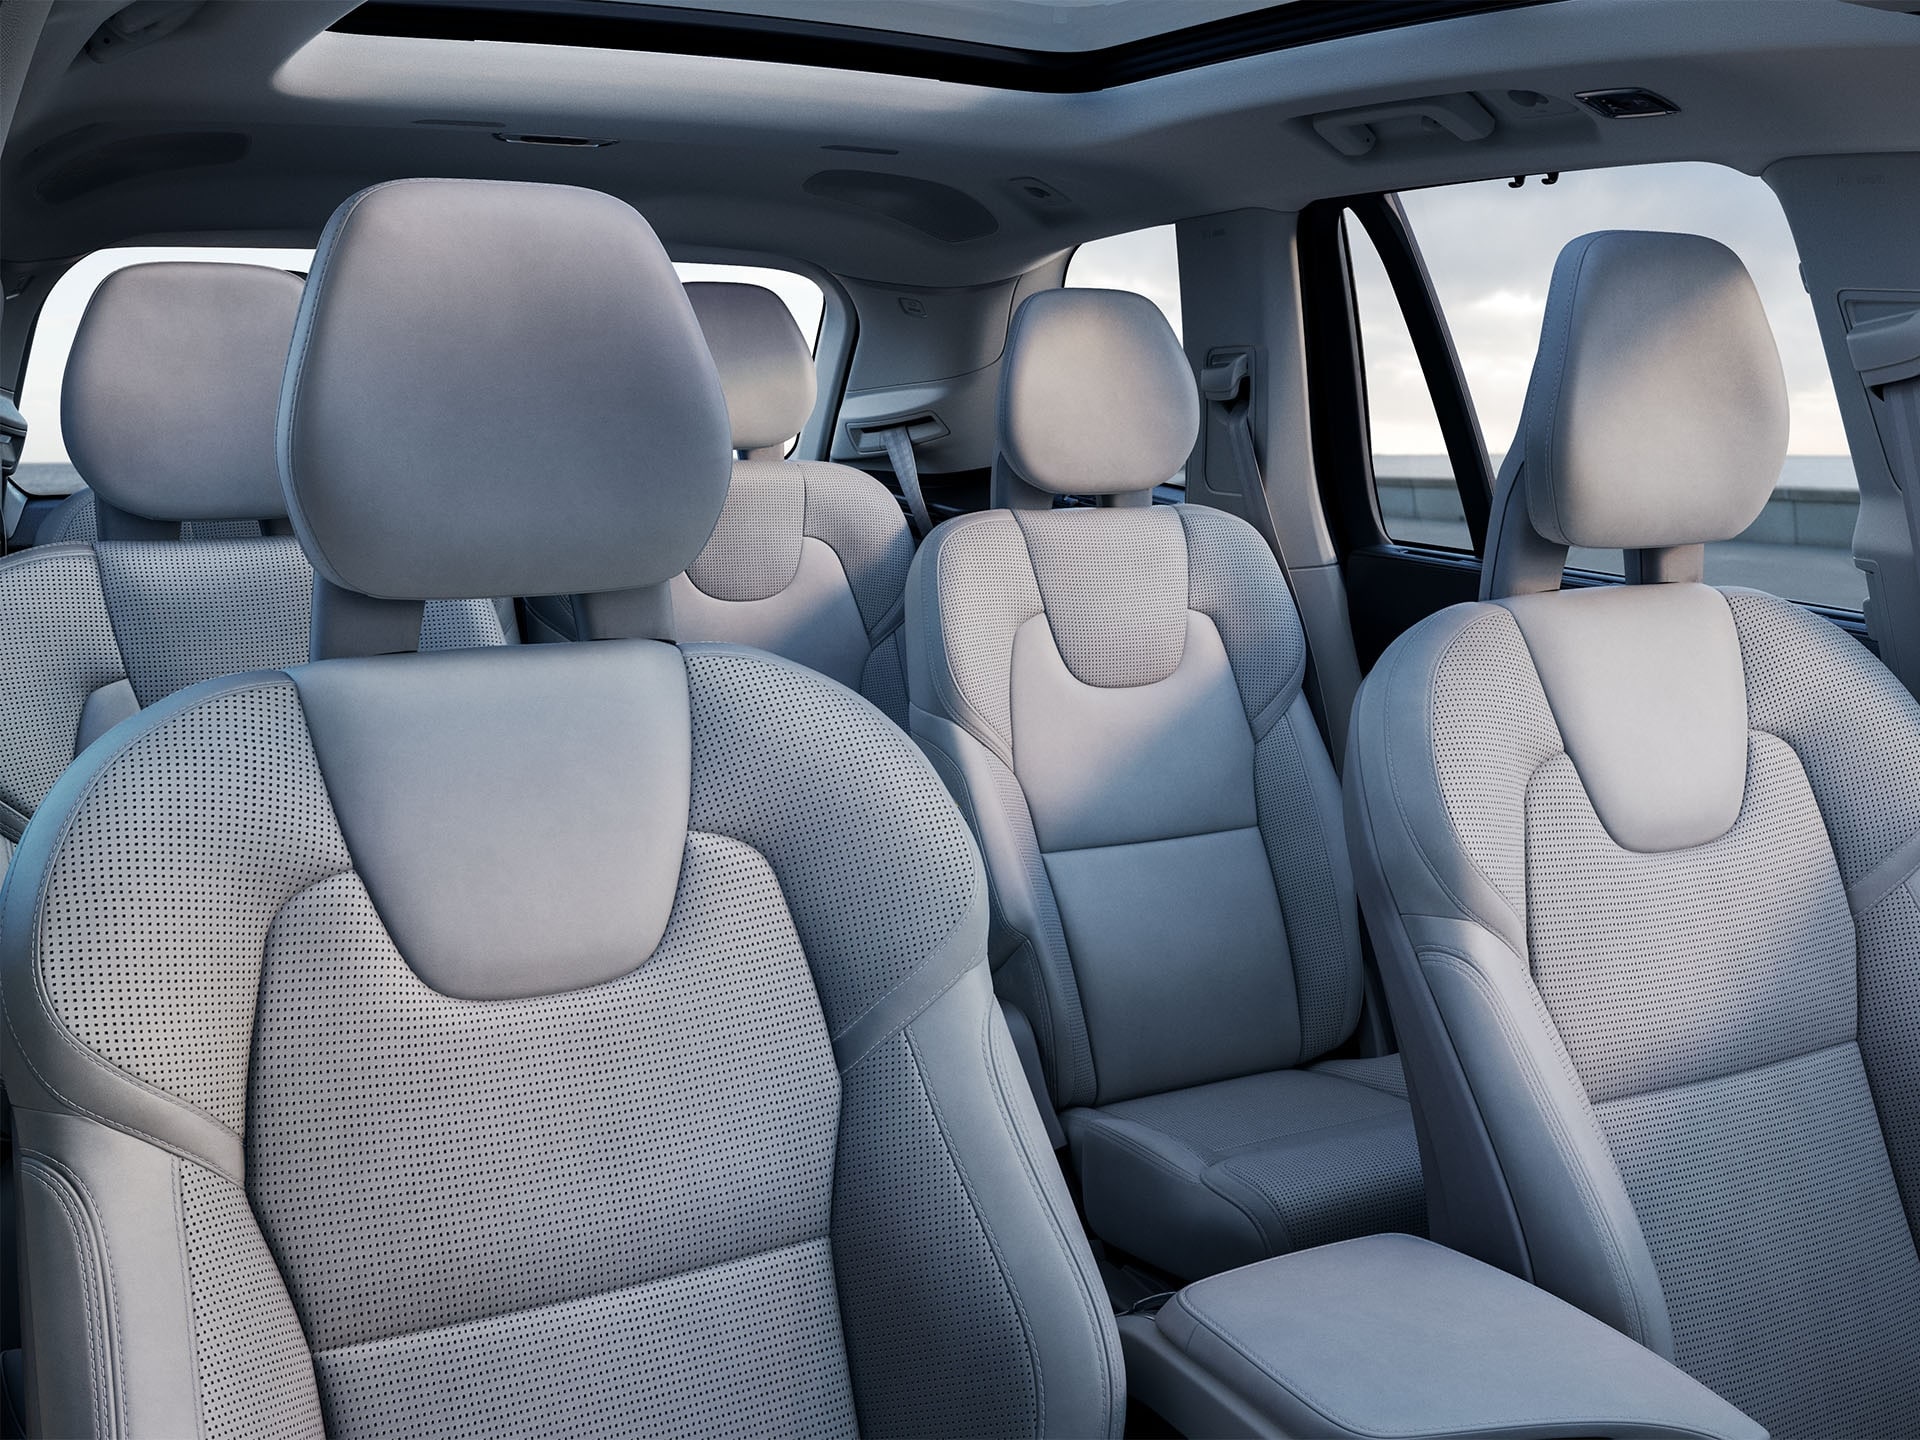 Inside a Volvo SUV with 3 rows, blonde interior on seats